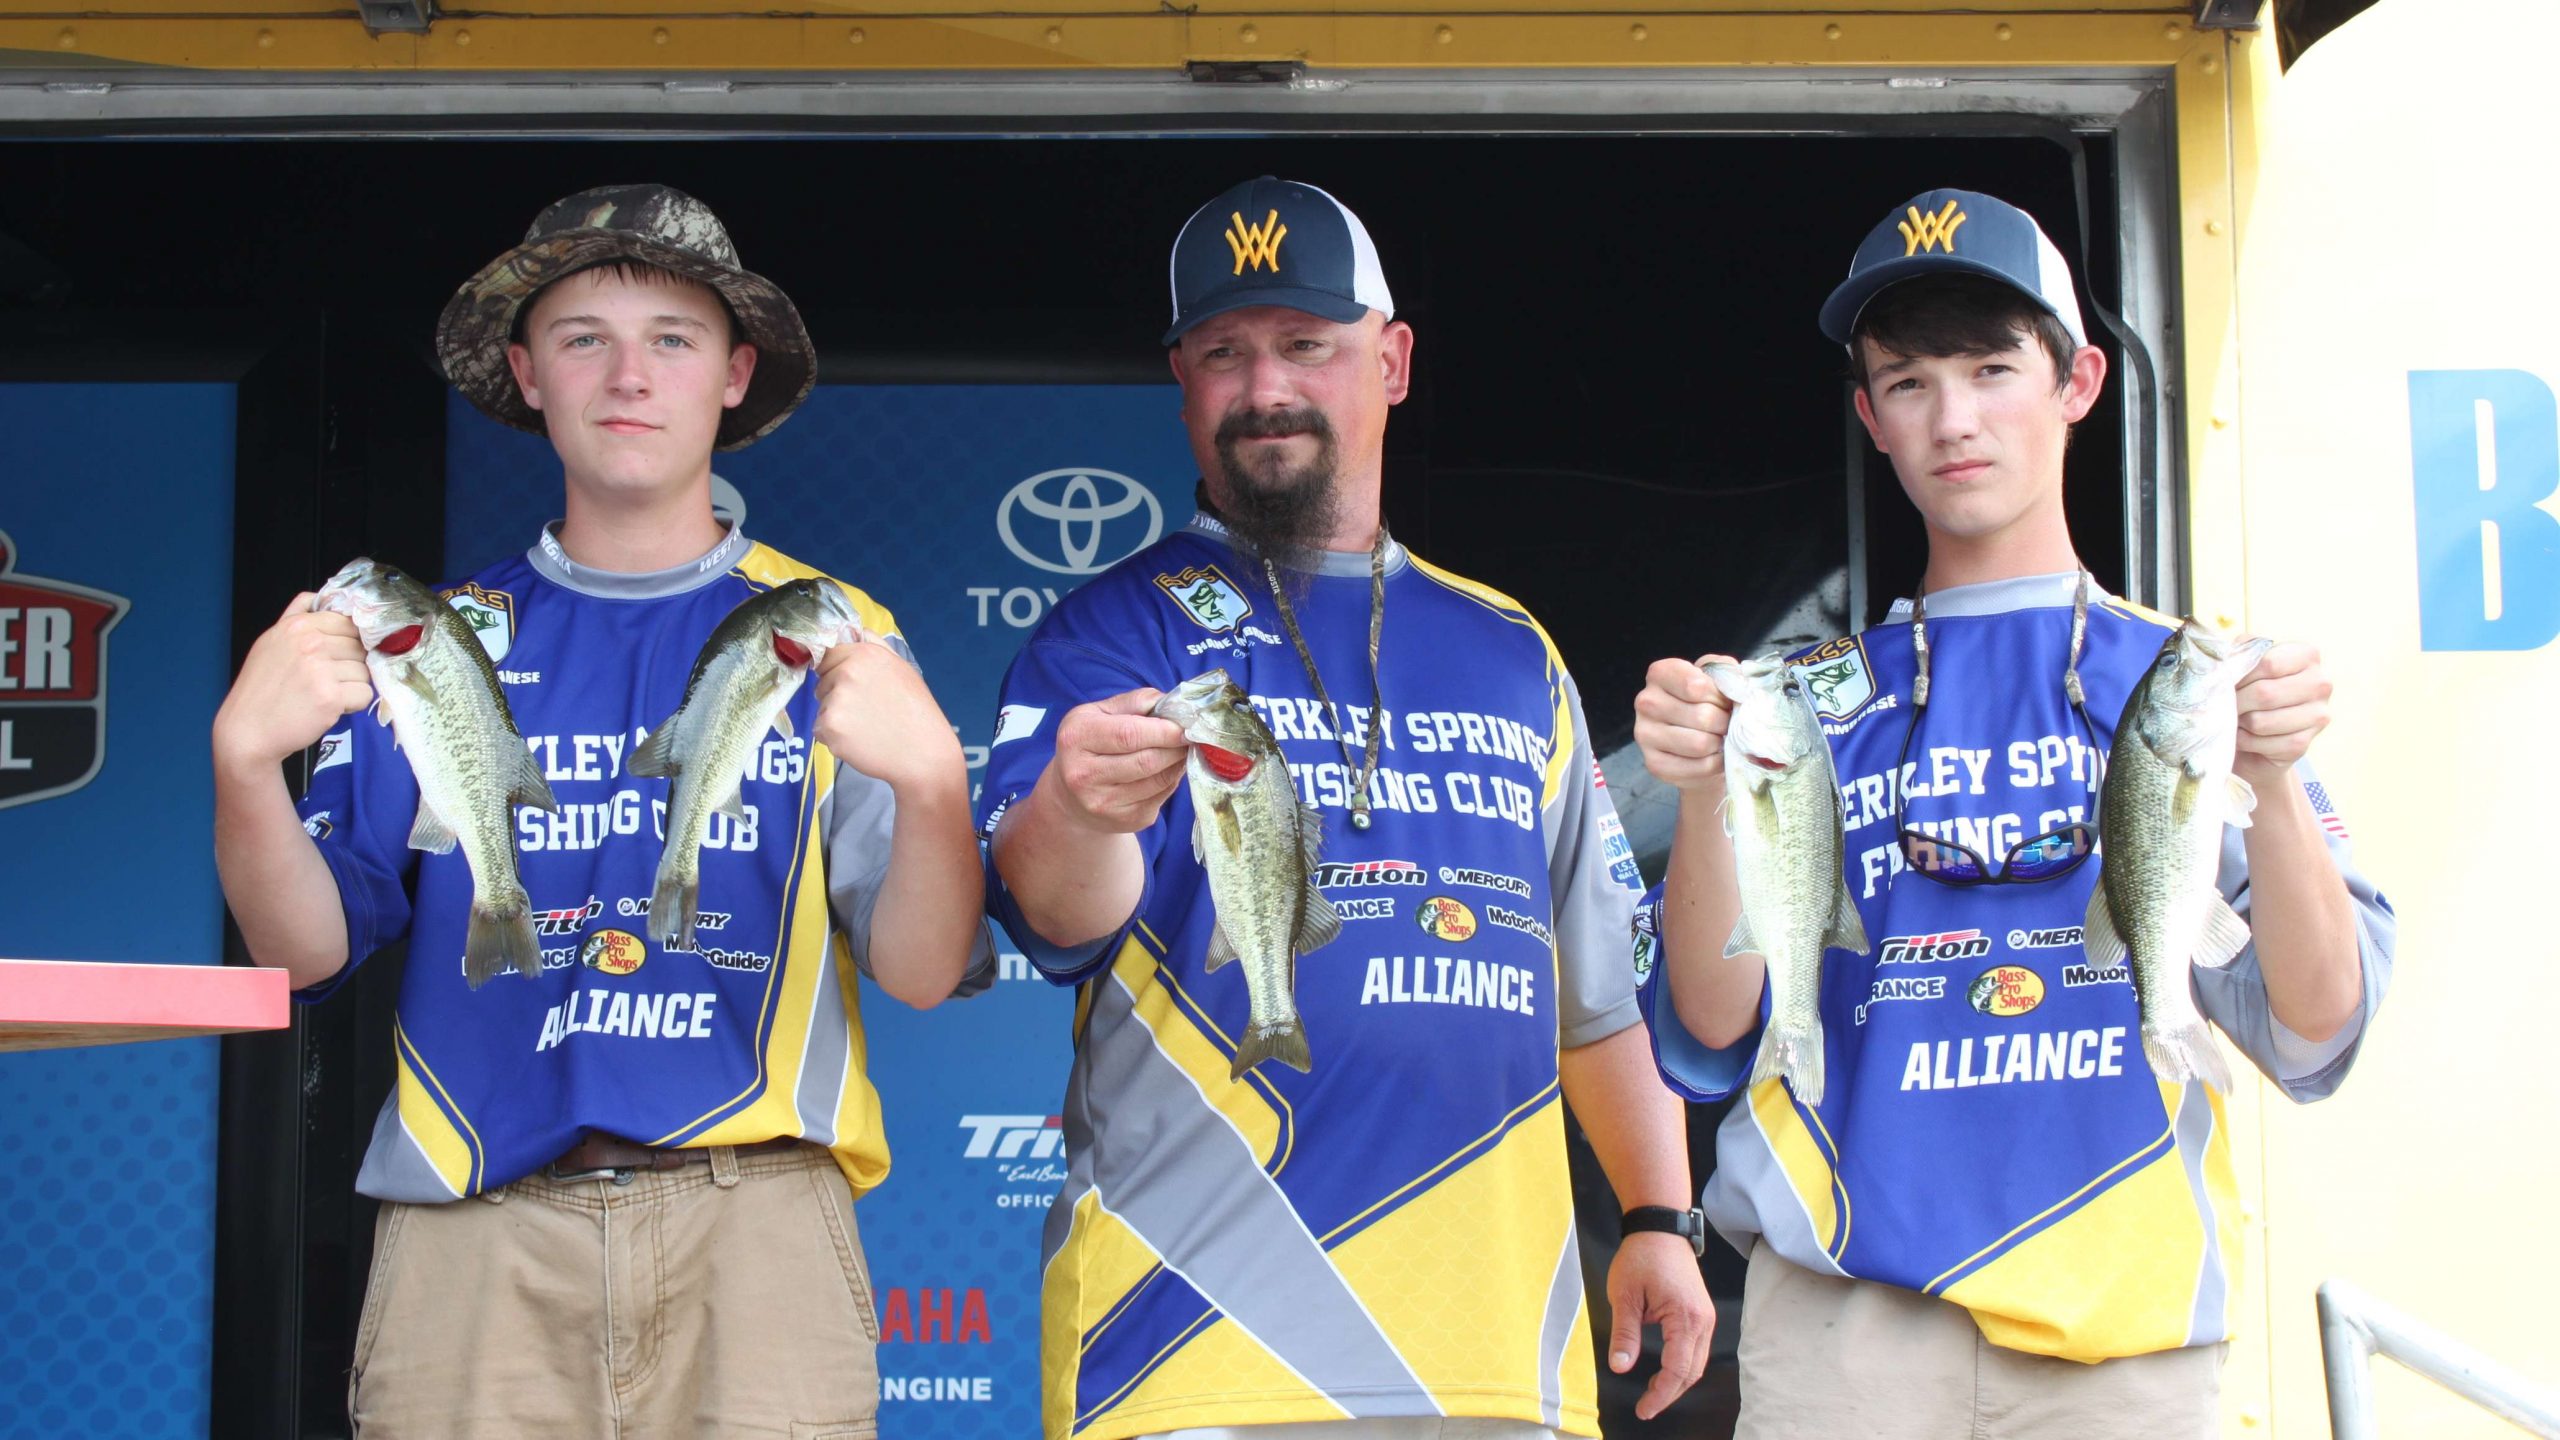 Team West Virginia anglers Samuel Ambrose and Trevor Albanese are in sixth place with a 4-6 total.